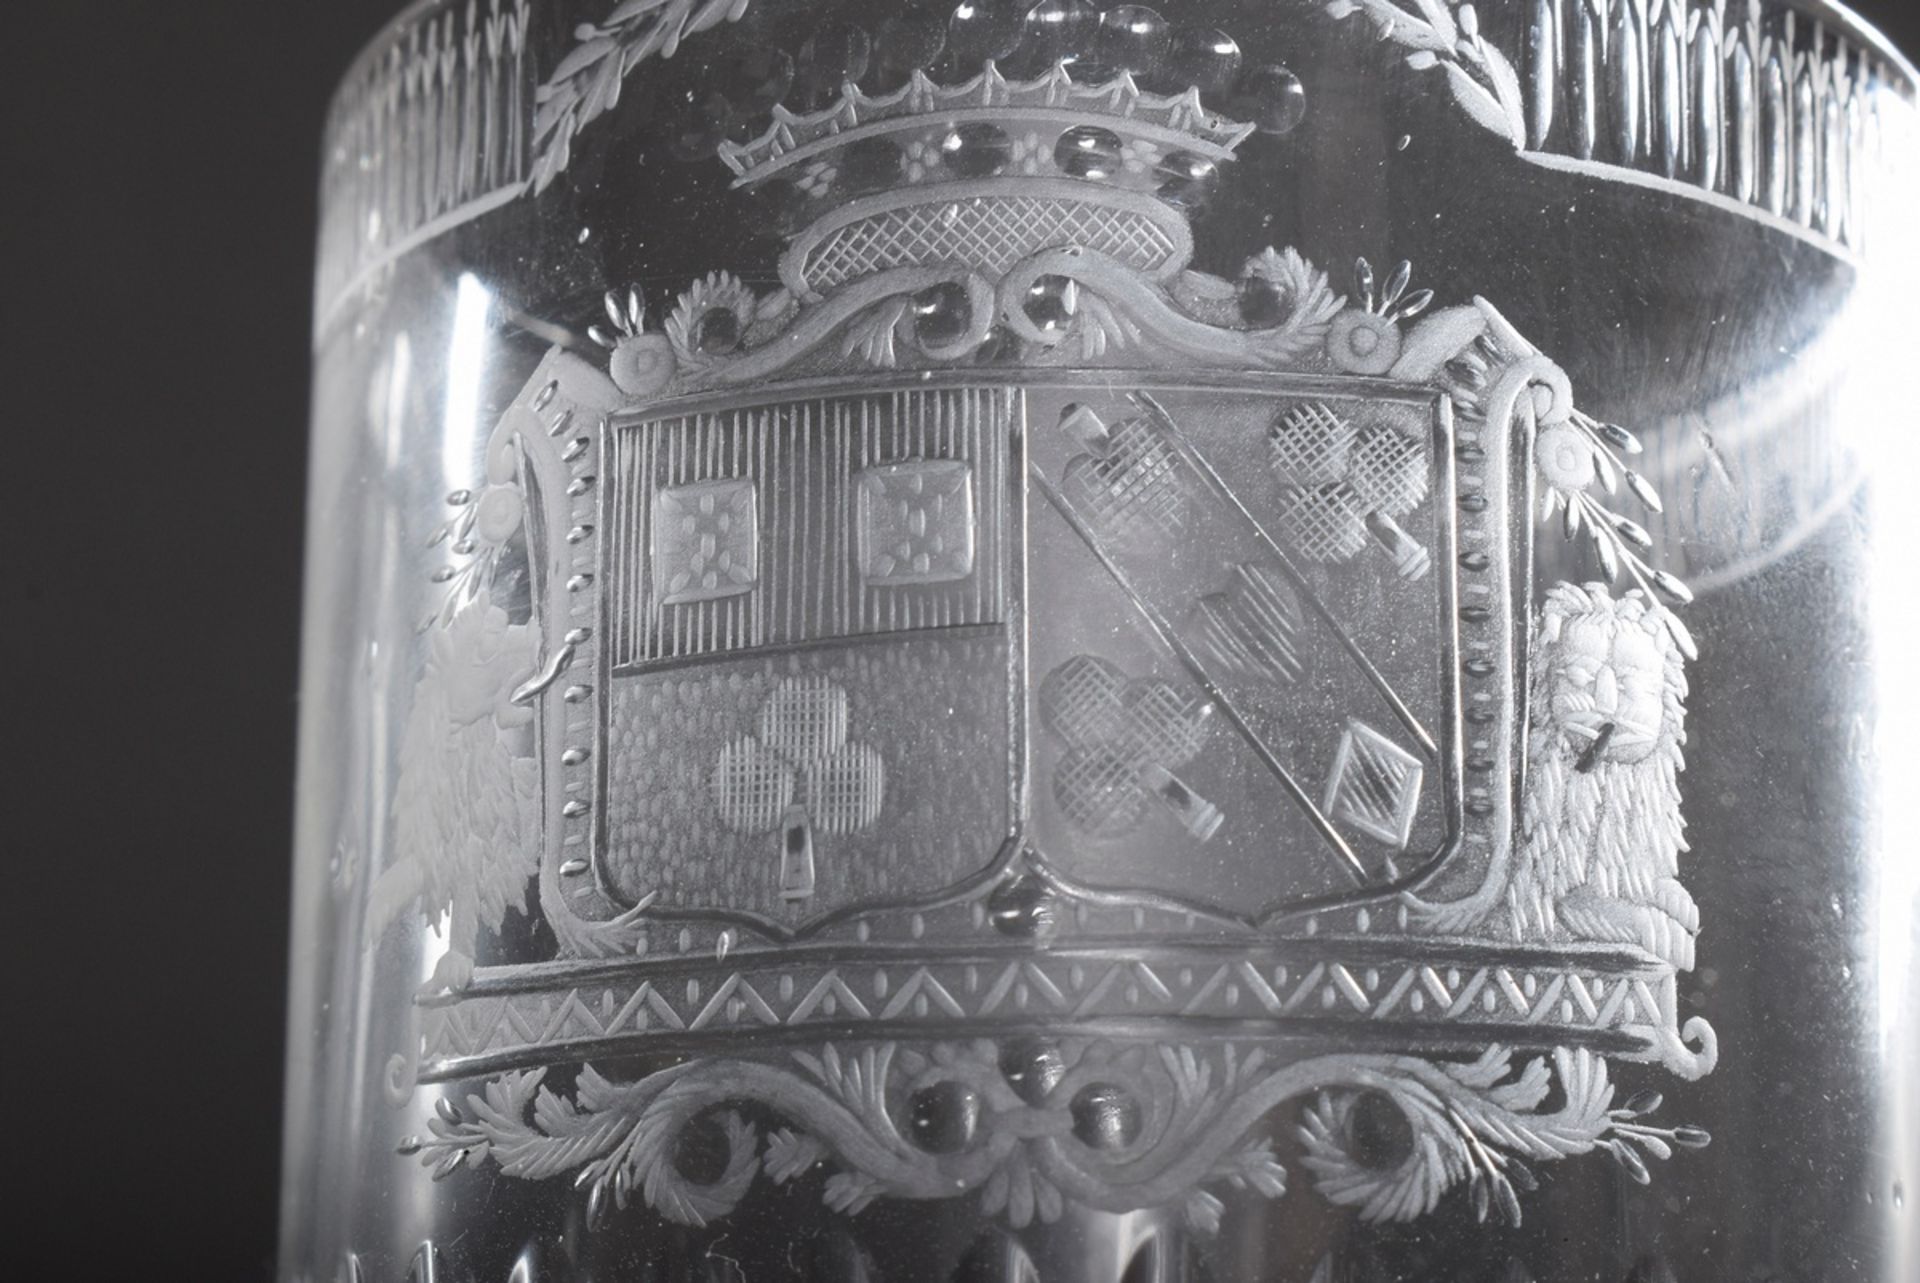 Small beaker with finely cut alliance coat of arms with playing card symbolism under count's crown, - Image 2 of 3